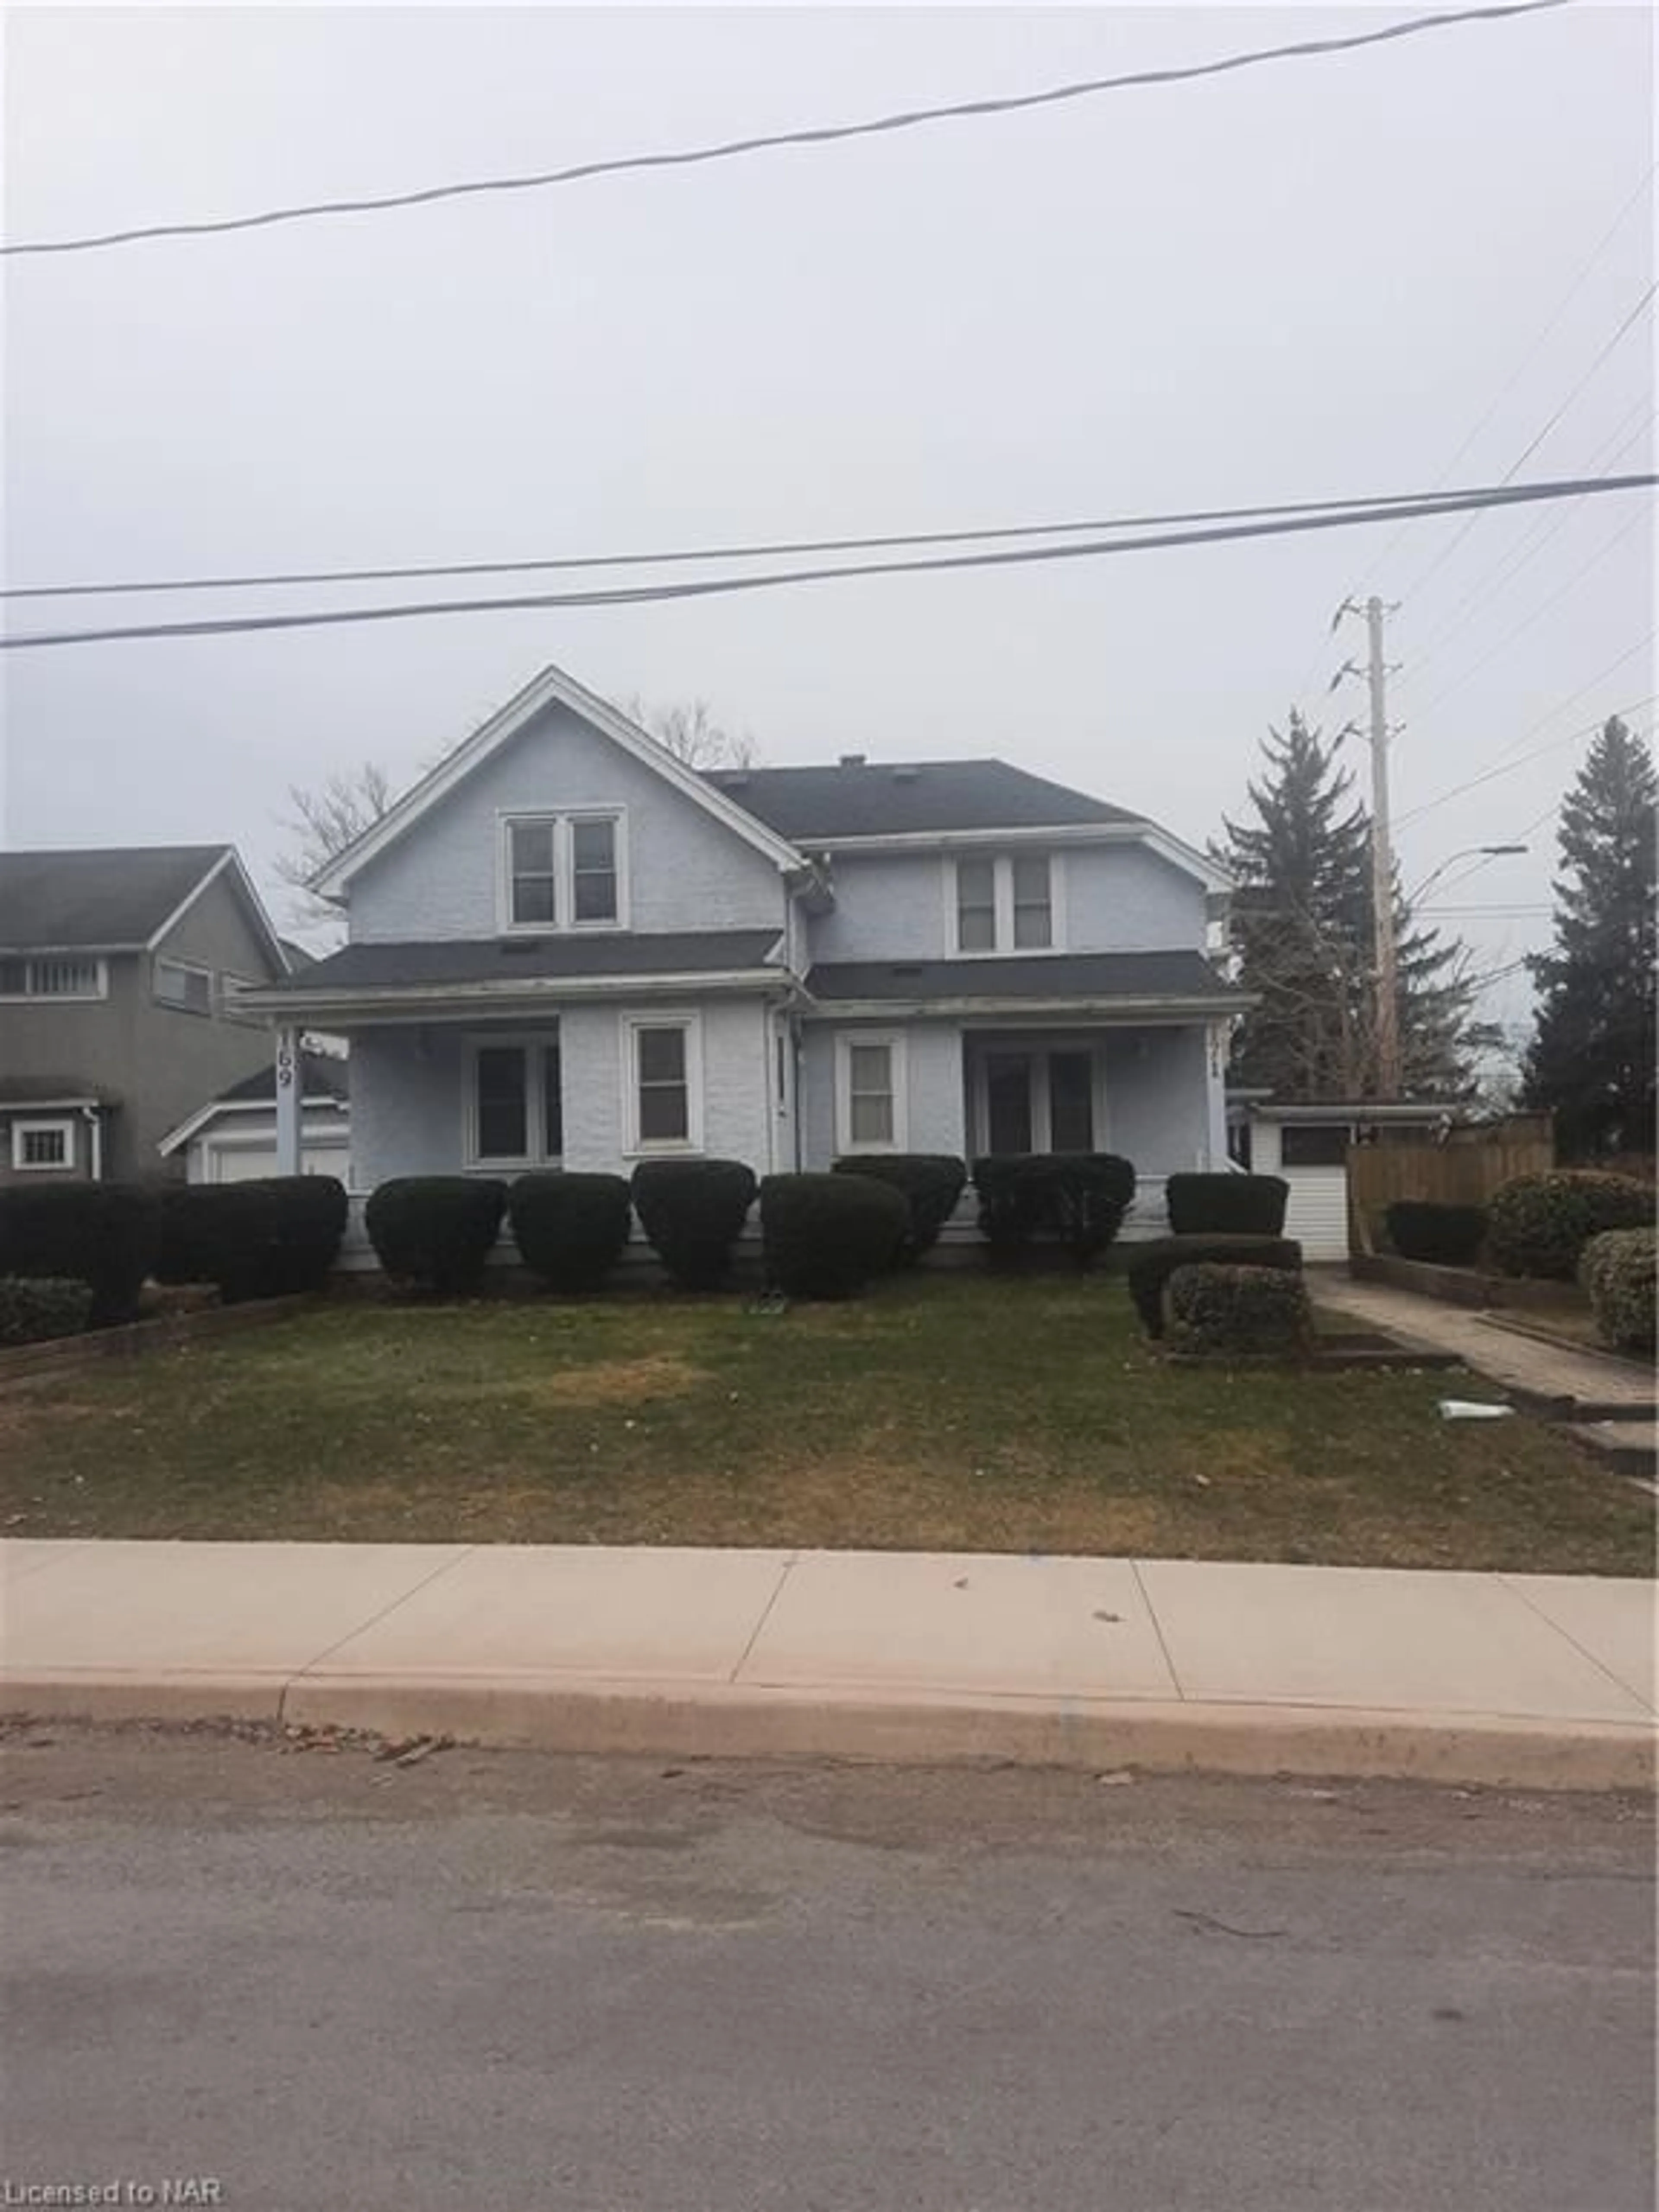 Frontside or backside of a home for 169 Merritt St, Welland Ontario L3C 4T7